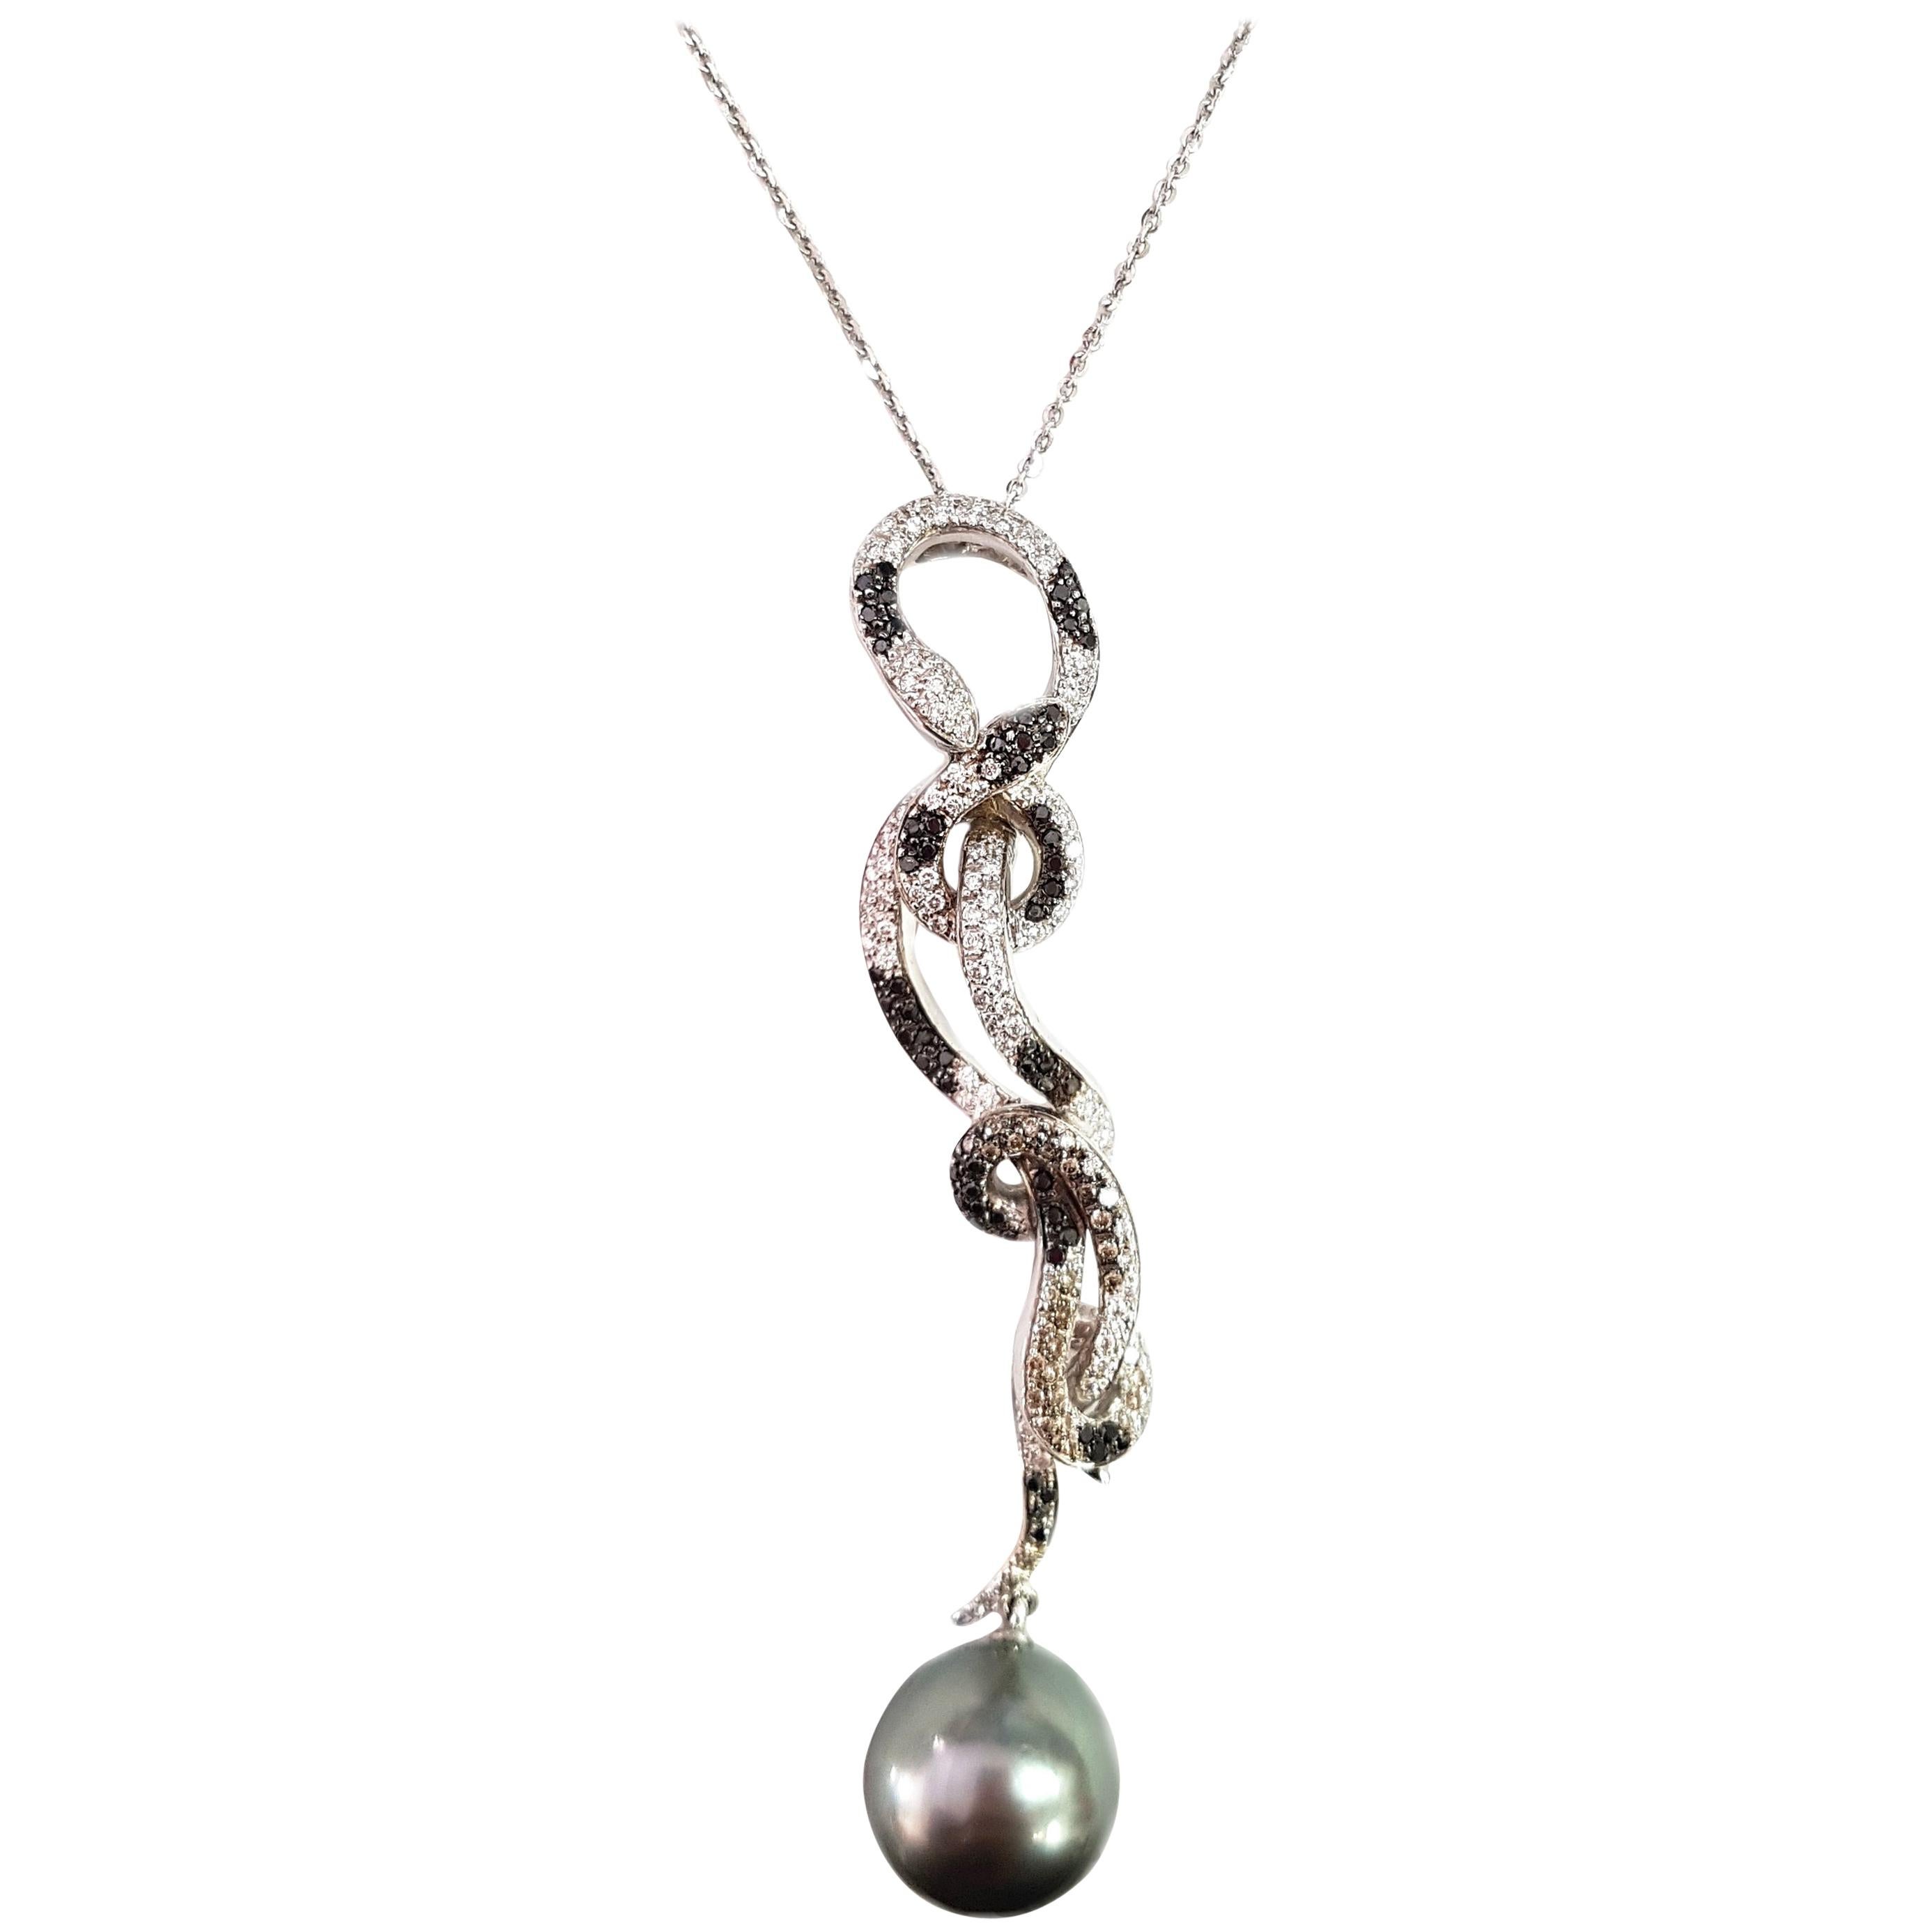 An exquisite pair of black and white serpents, set with a total of 1.06 carats of black and white diamonds, writhe together – below the serpents hangs an 18.20-carat grey Tahitian pearl. Both the necklace and pendant are crafted from 18-karat white